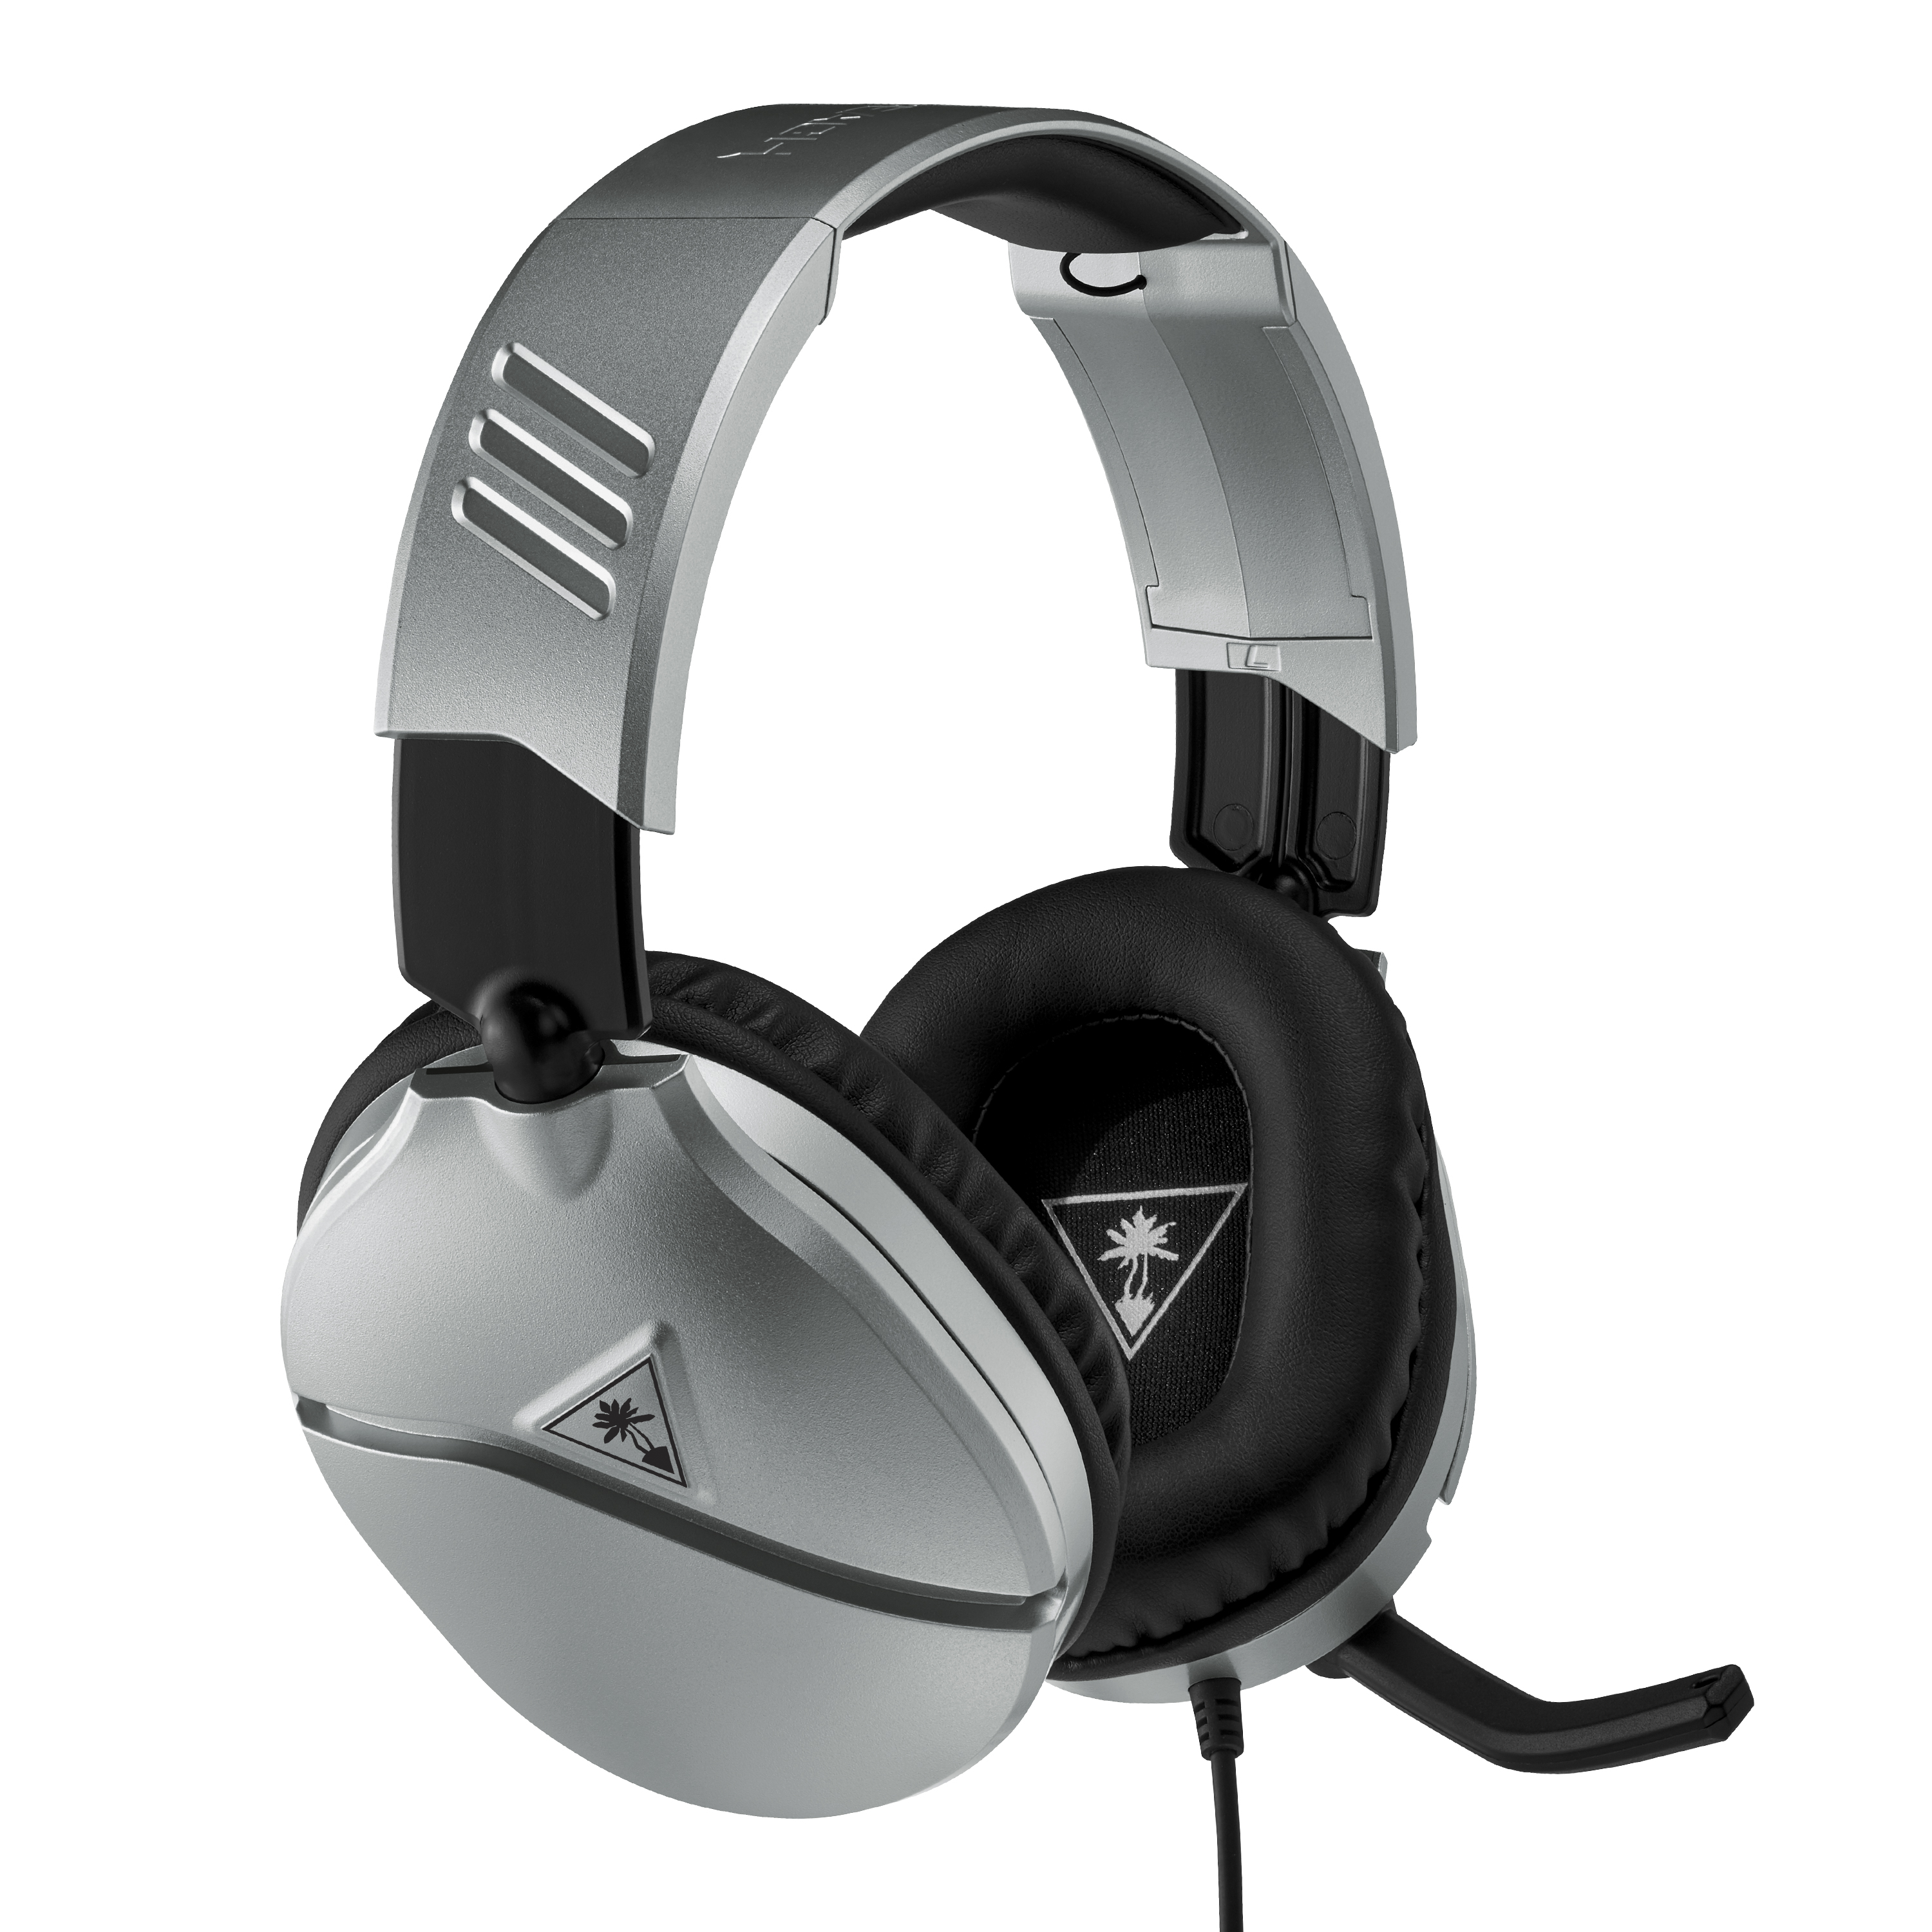 Turtle Beach Recon 70 Xbox Gaming Headset for Xbox Series X, Xbox Series S, Xbox One, PS5, PS4, PlayStation, Nintendo Switch, Mobile, & PC with 3.5mm - Flip-to-Mute Mic, 40mm Speakers - Silver - image 1 of 8